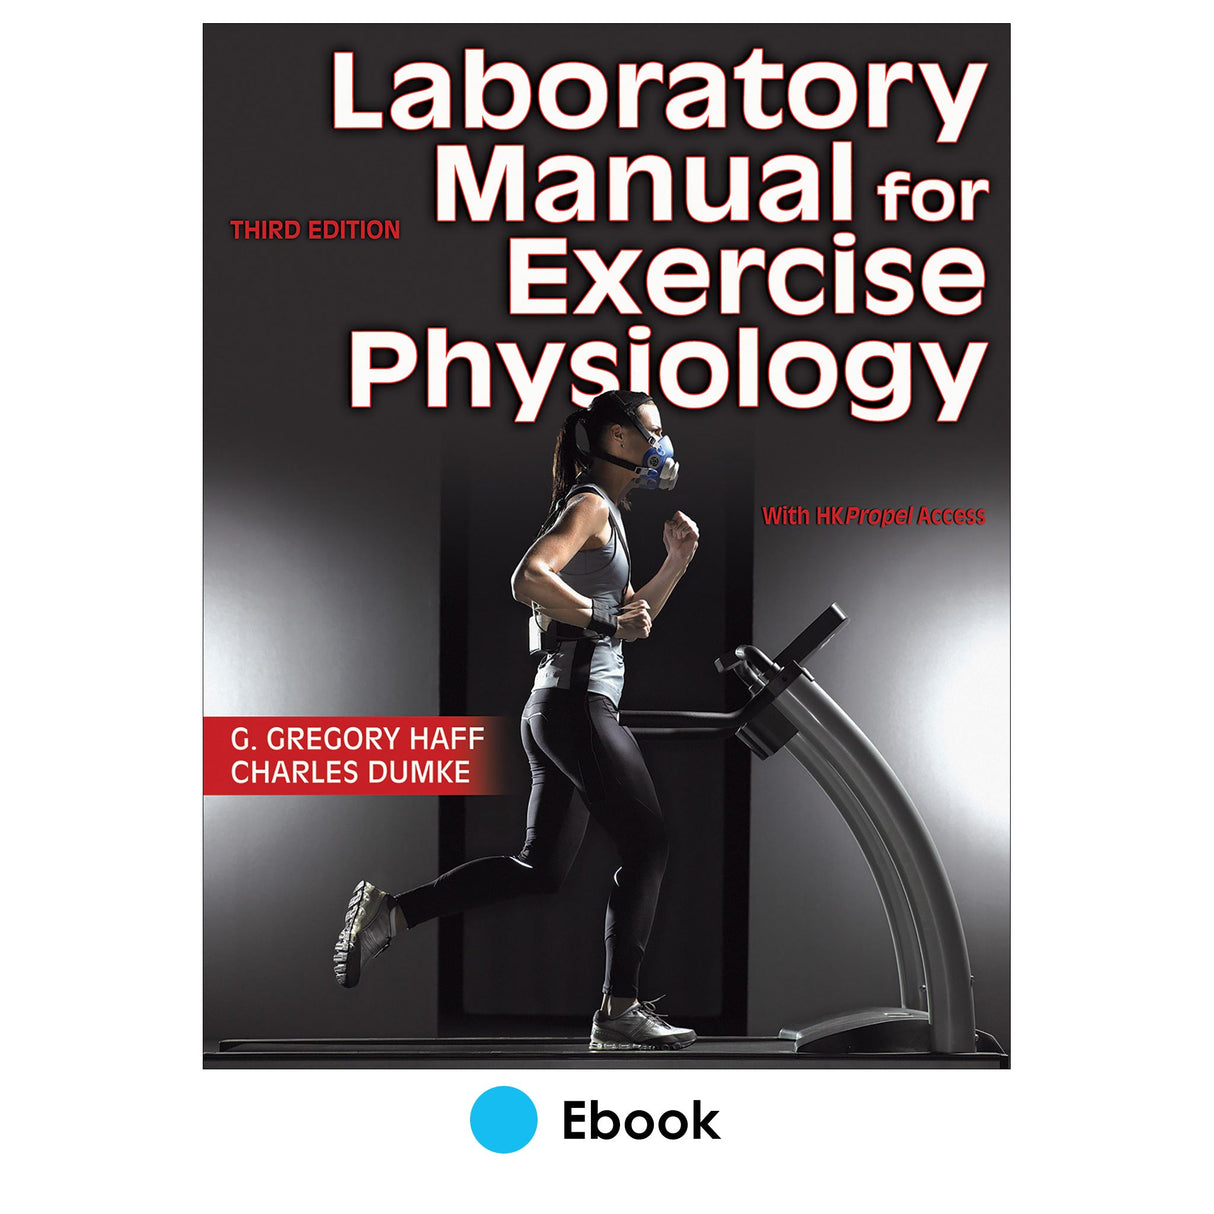 Laboratory Manual for Exercise Physiology 3rd Edition Ebook With HKPropel Access